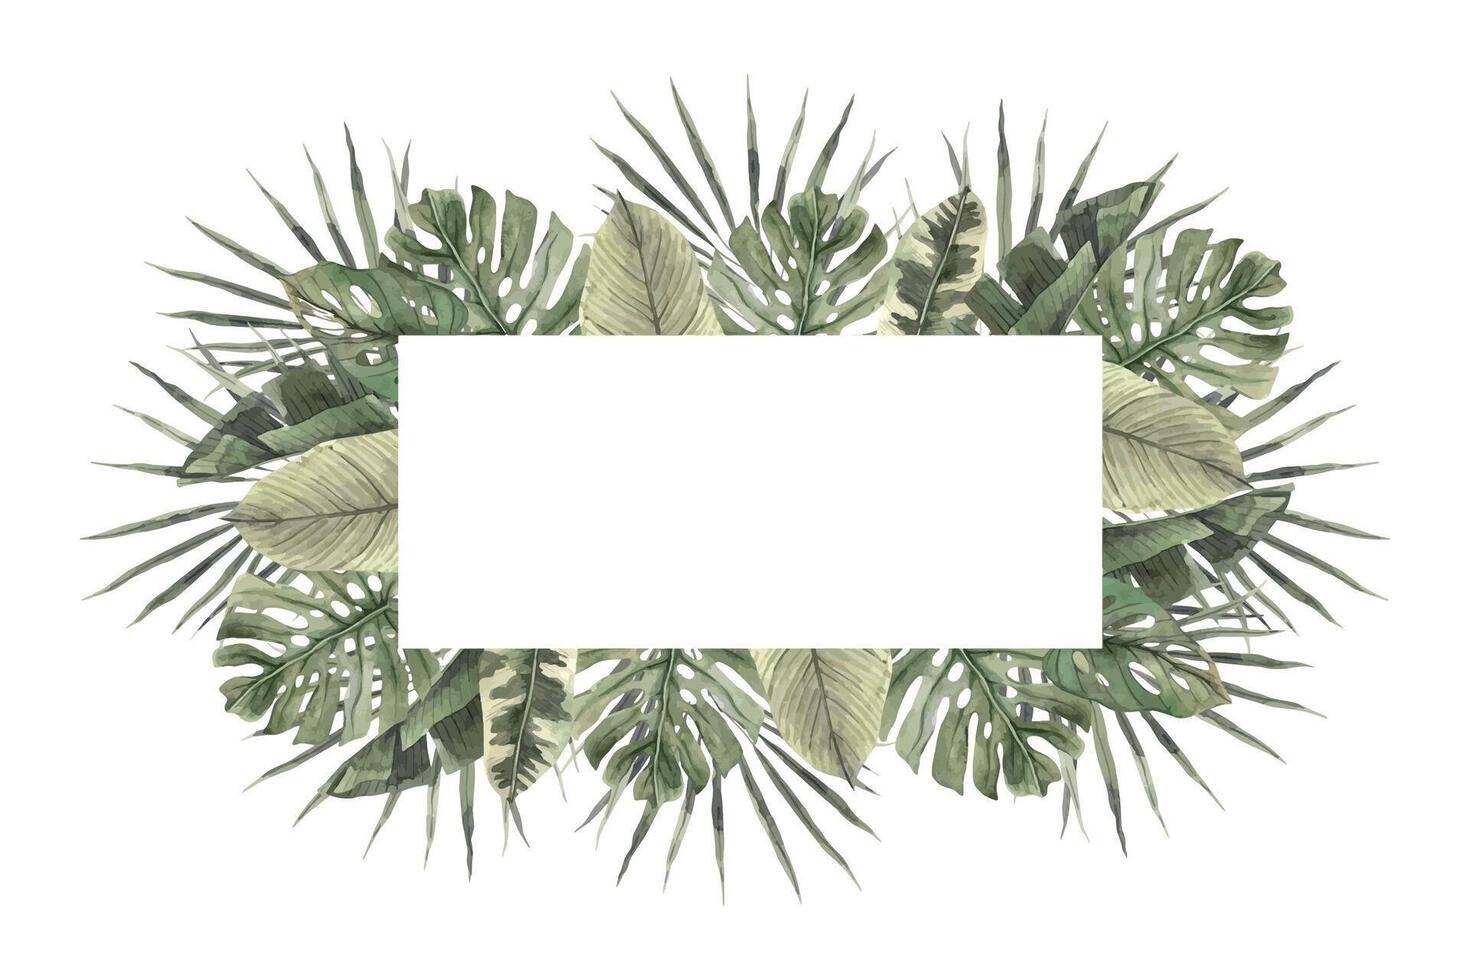 Rectangular frame of tropical leaves, fan palm, monstera, strelitzia. Hand drawn watercolor frame on isolated background. Botanical illustration for design of invitations, cards, weddings and holidays vector